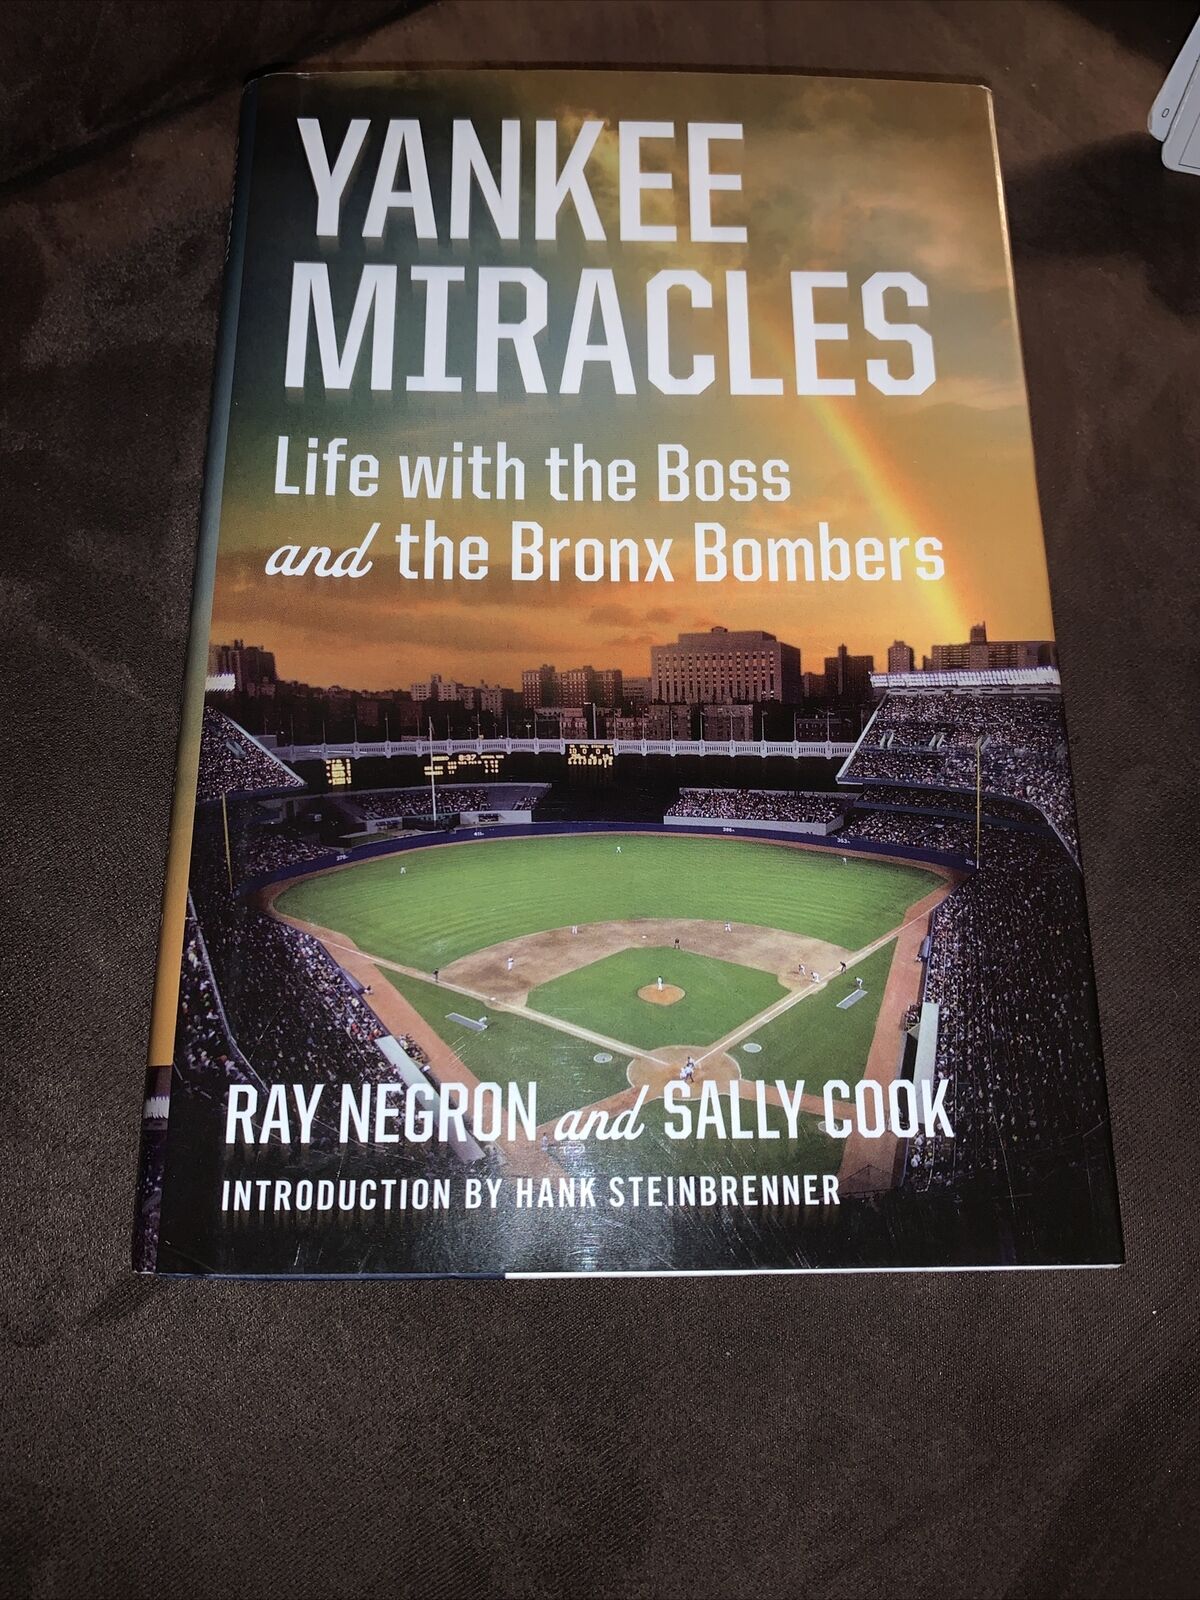 RAY NEGRON BASEBALL LEGEND SIGNED AUTOGRAPHED NY YANKEES MIRACLES BOOK TO: JOE